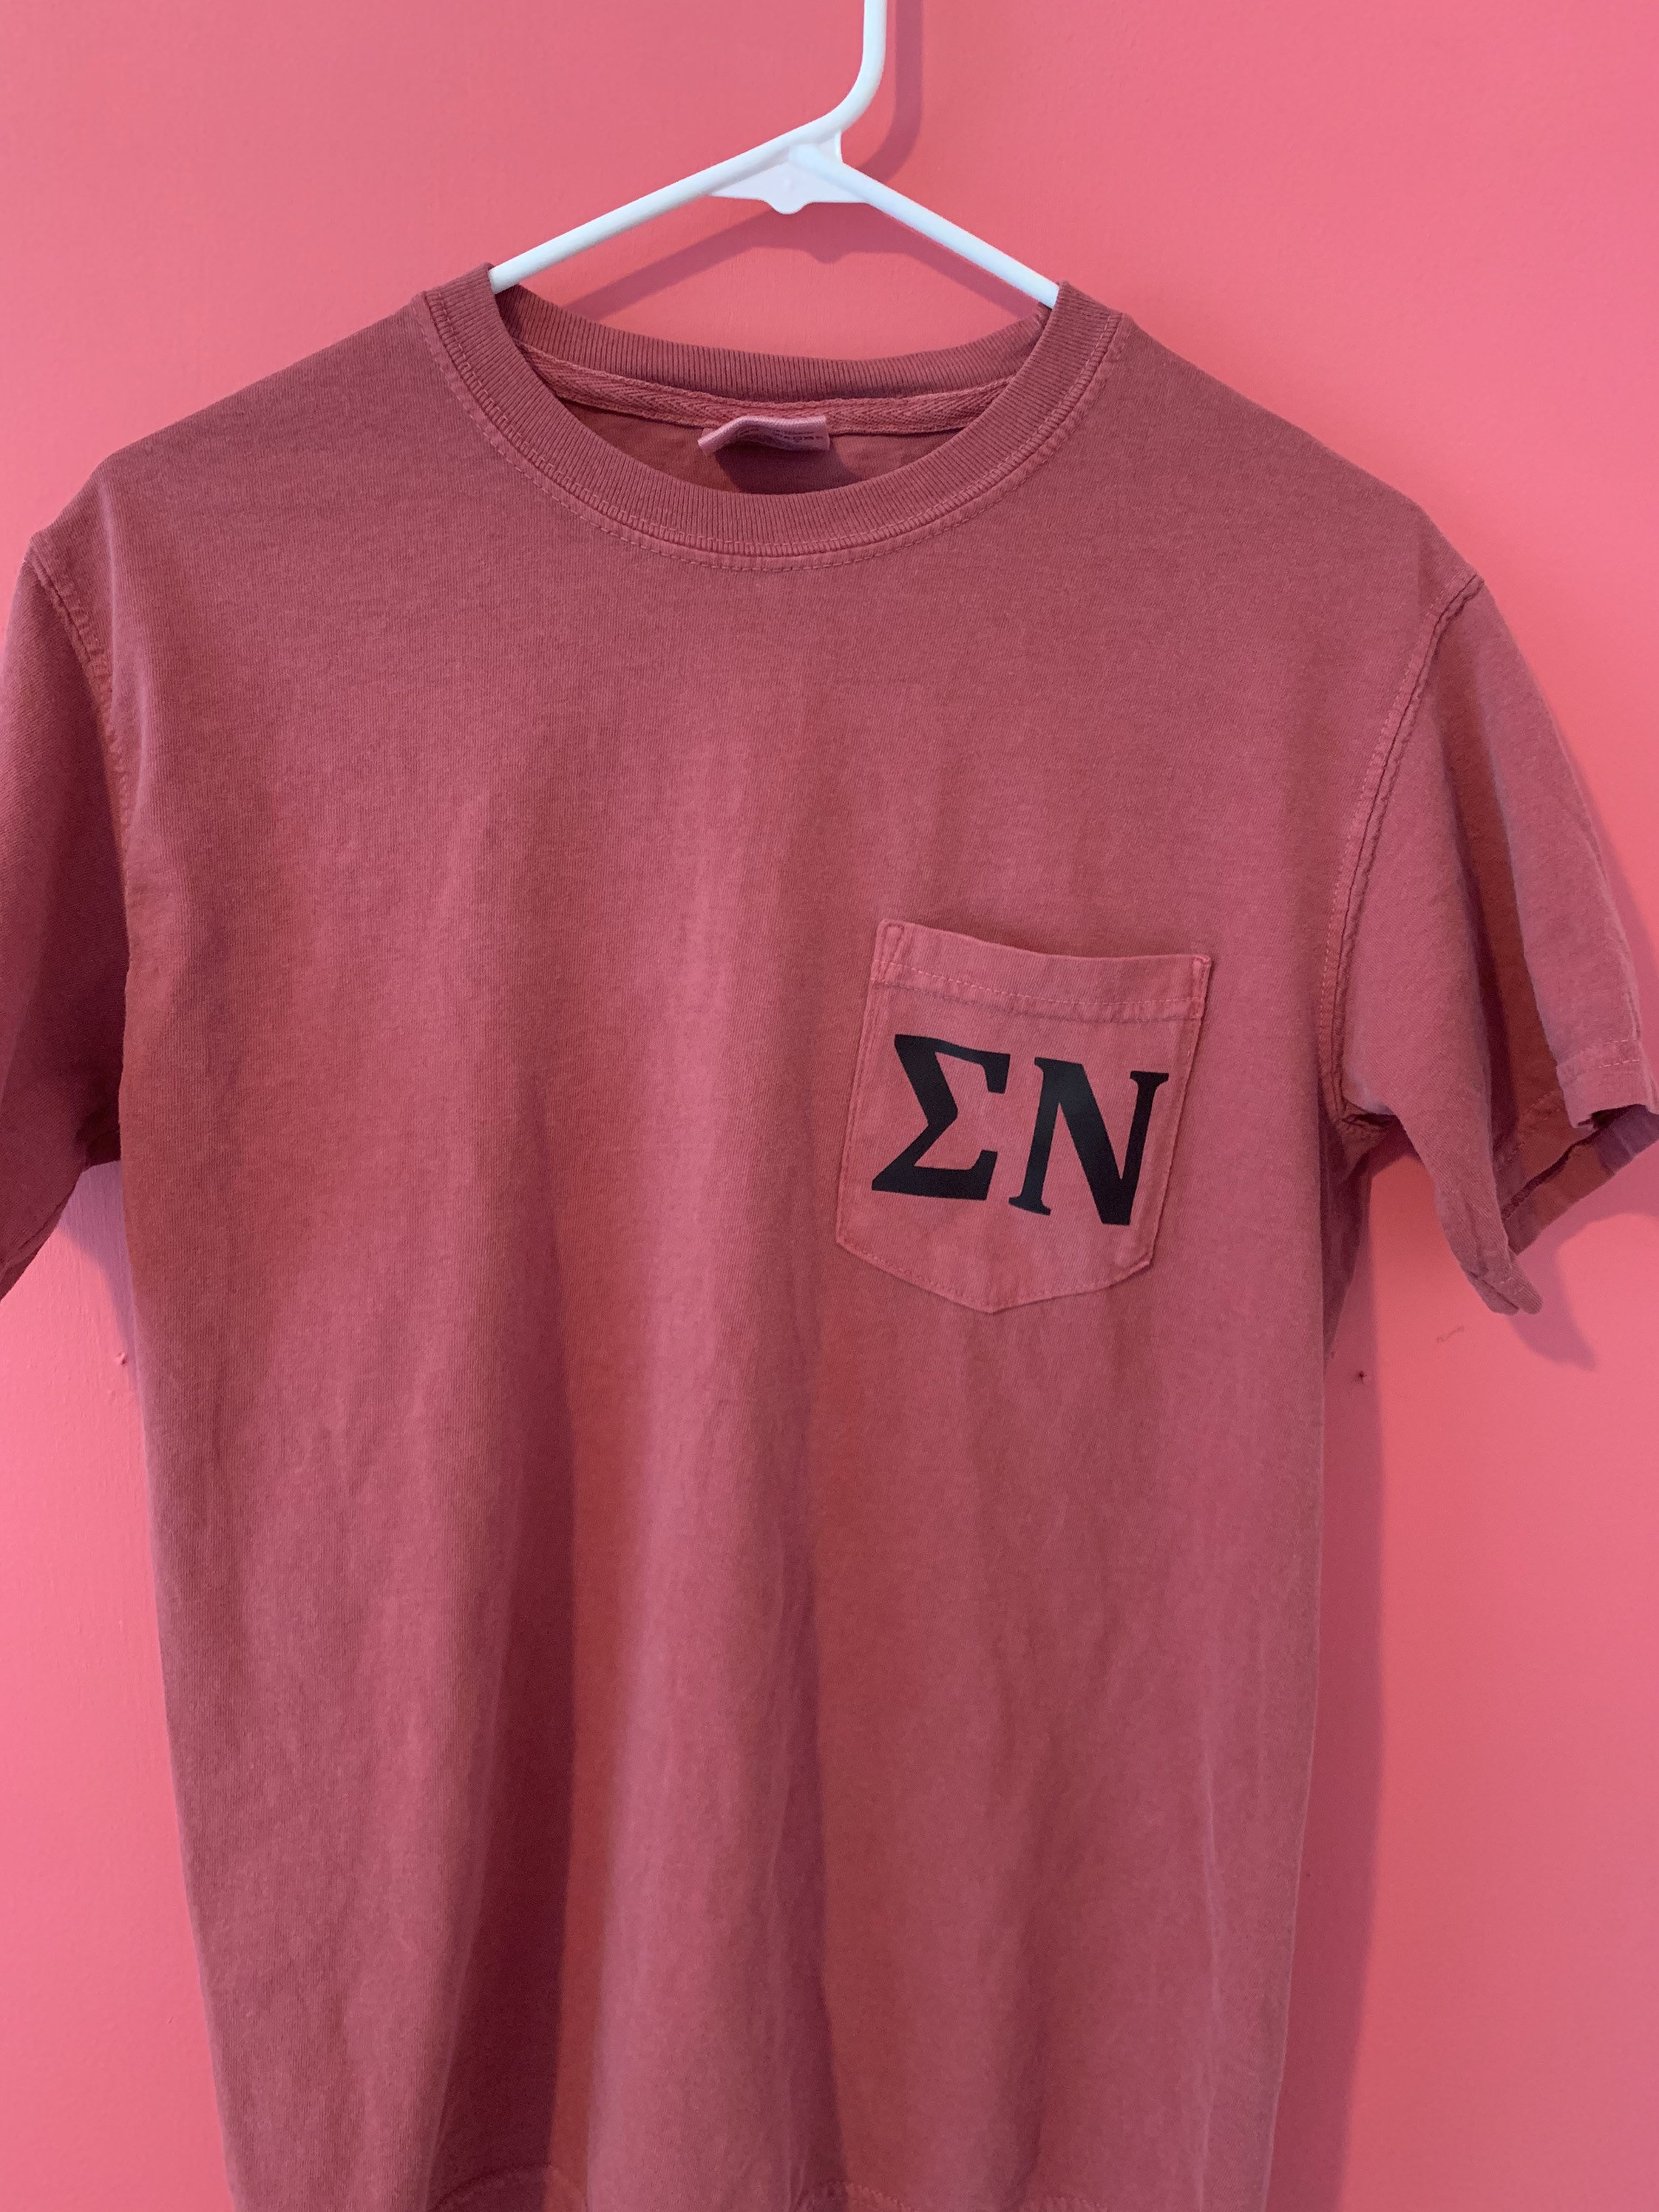 Sigma Nu Fraternity Comfort Colors Pocket T-Shirt (Small, Blue Jean)